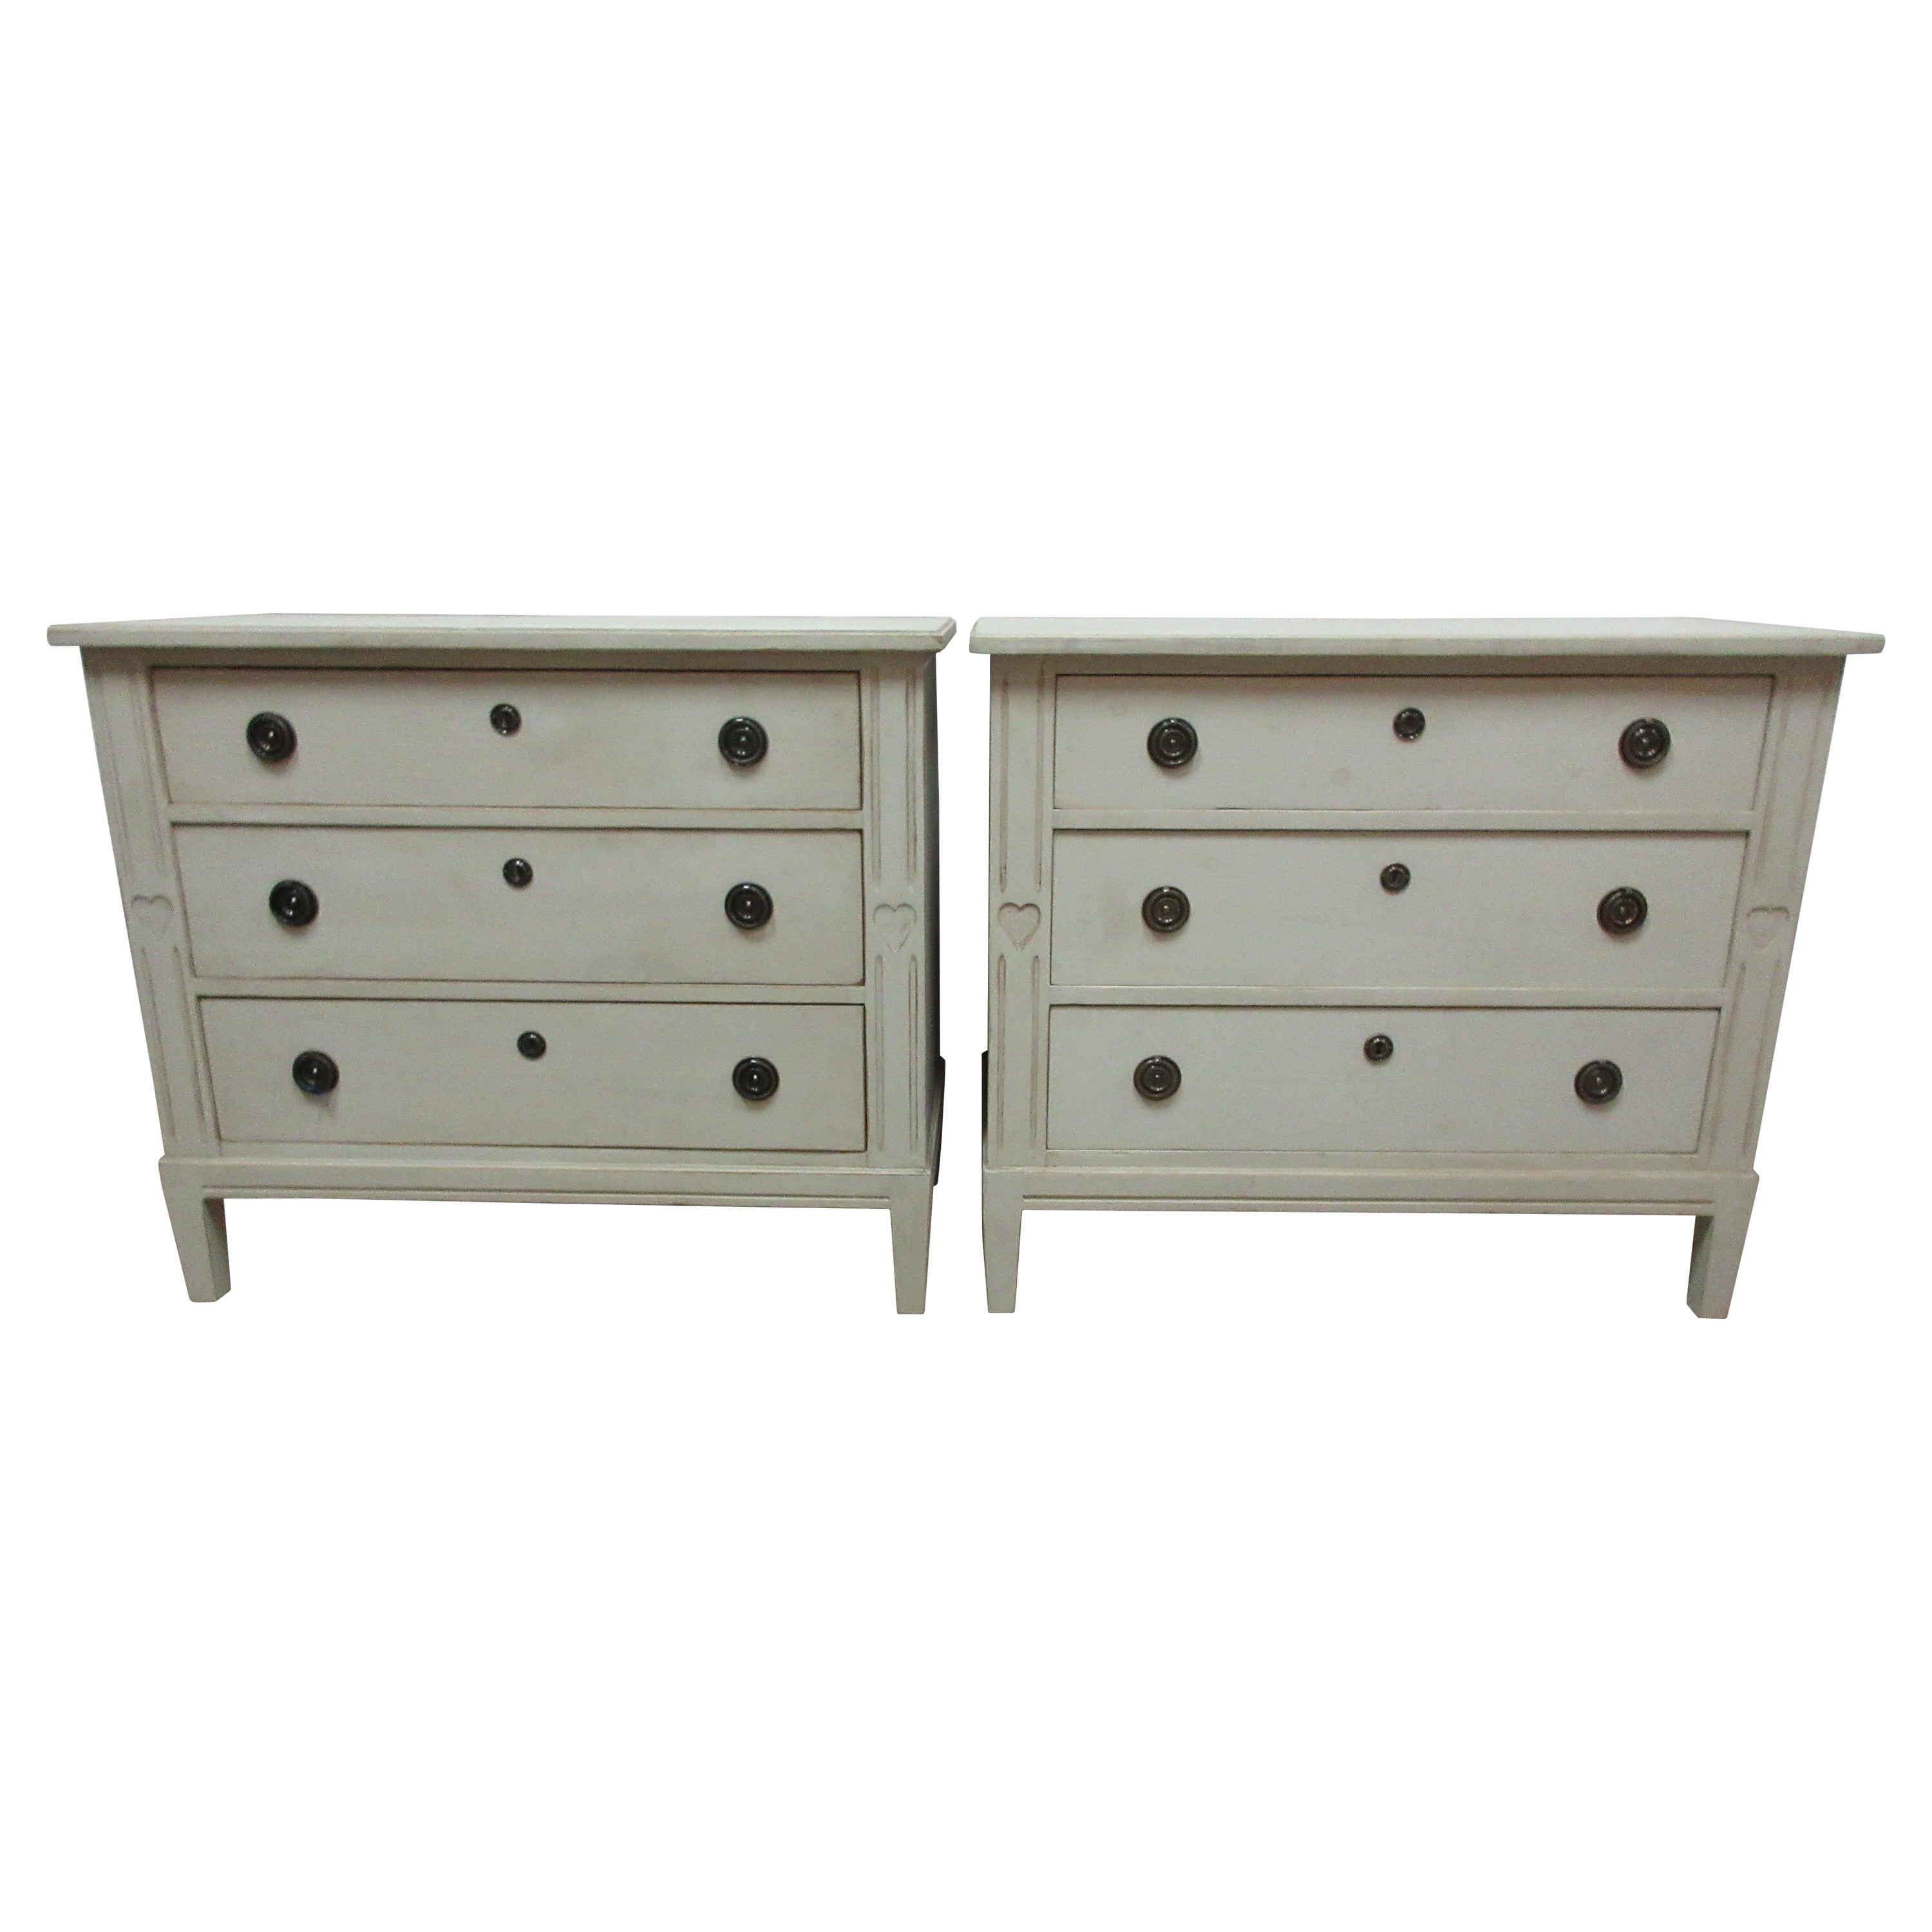 2 Swedish Heart Chests of Drawers